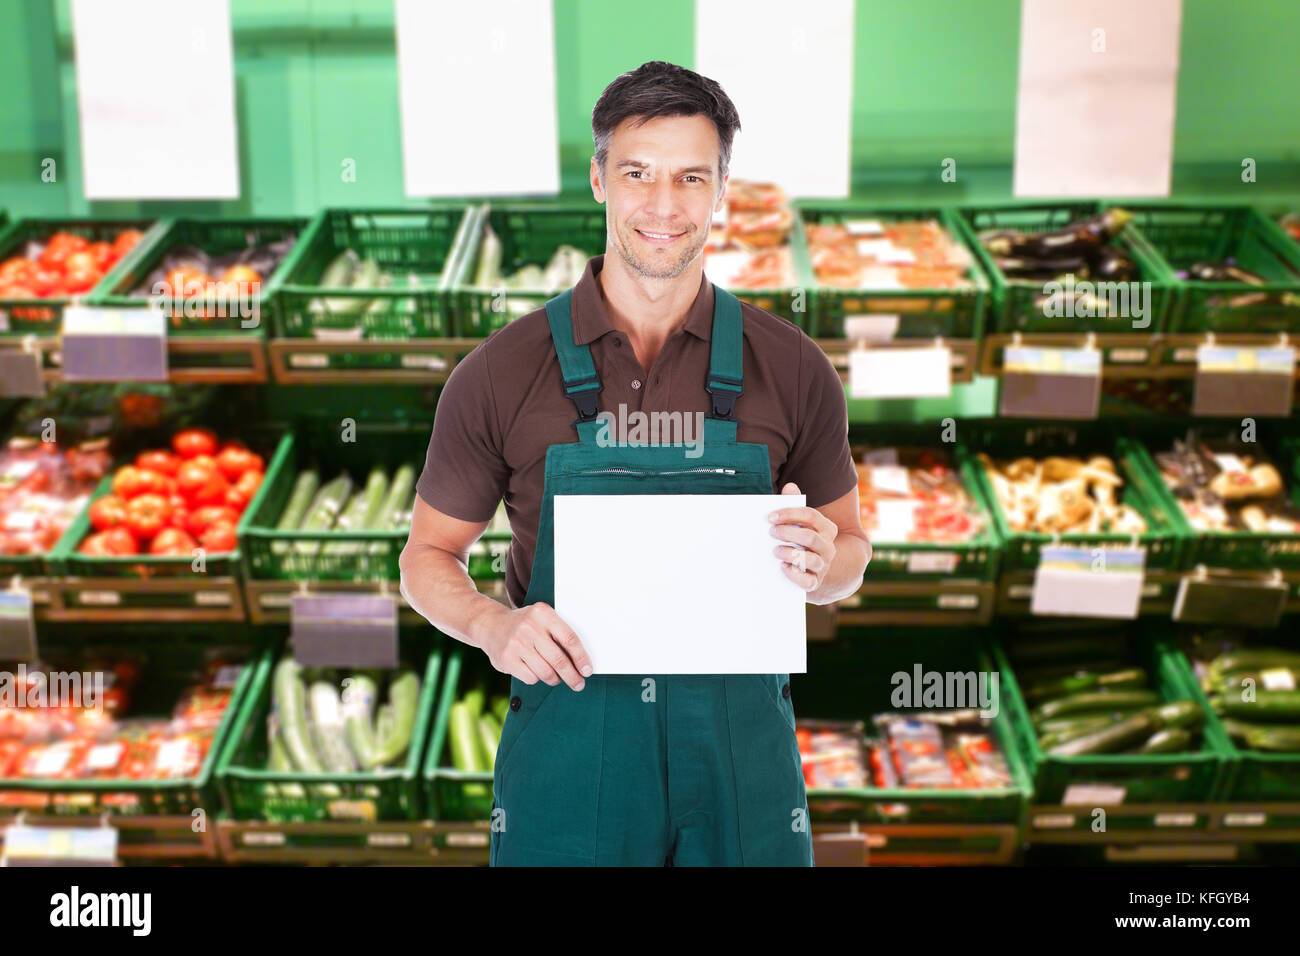 Mature Male Sales Clerk Holding A Blank Placard In Supermarket Stock Photo